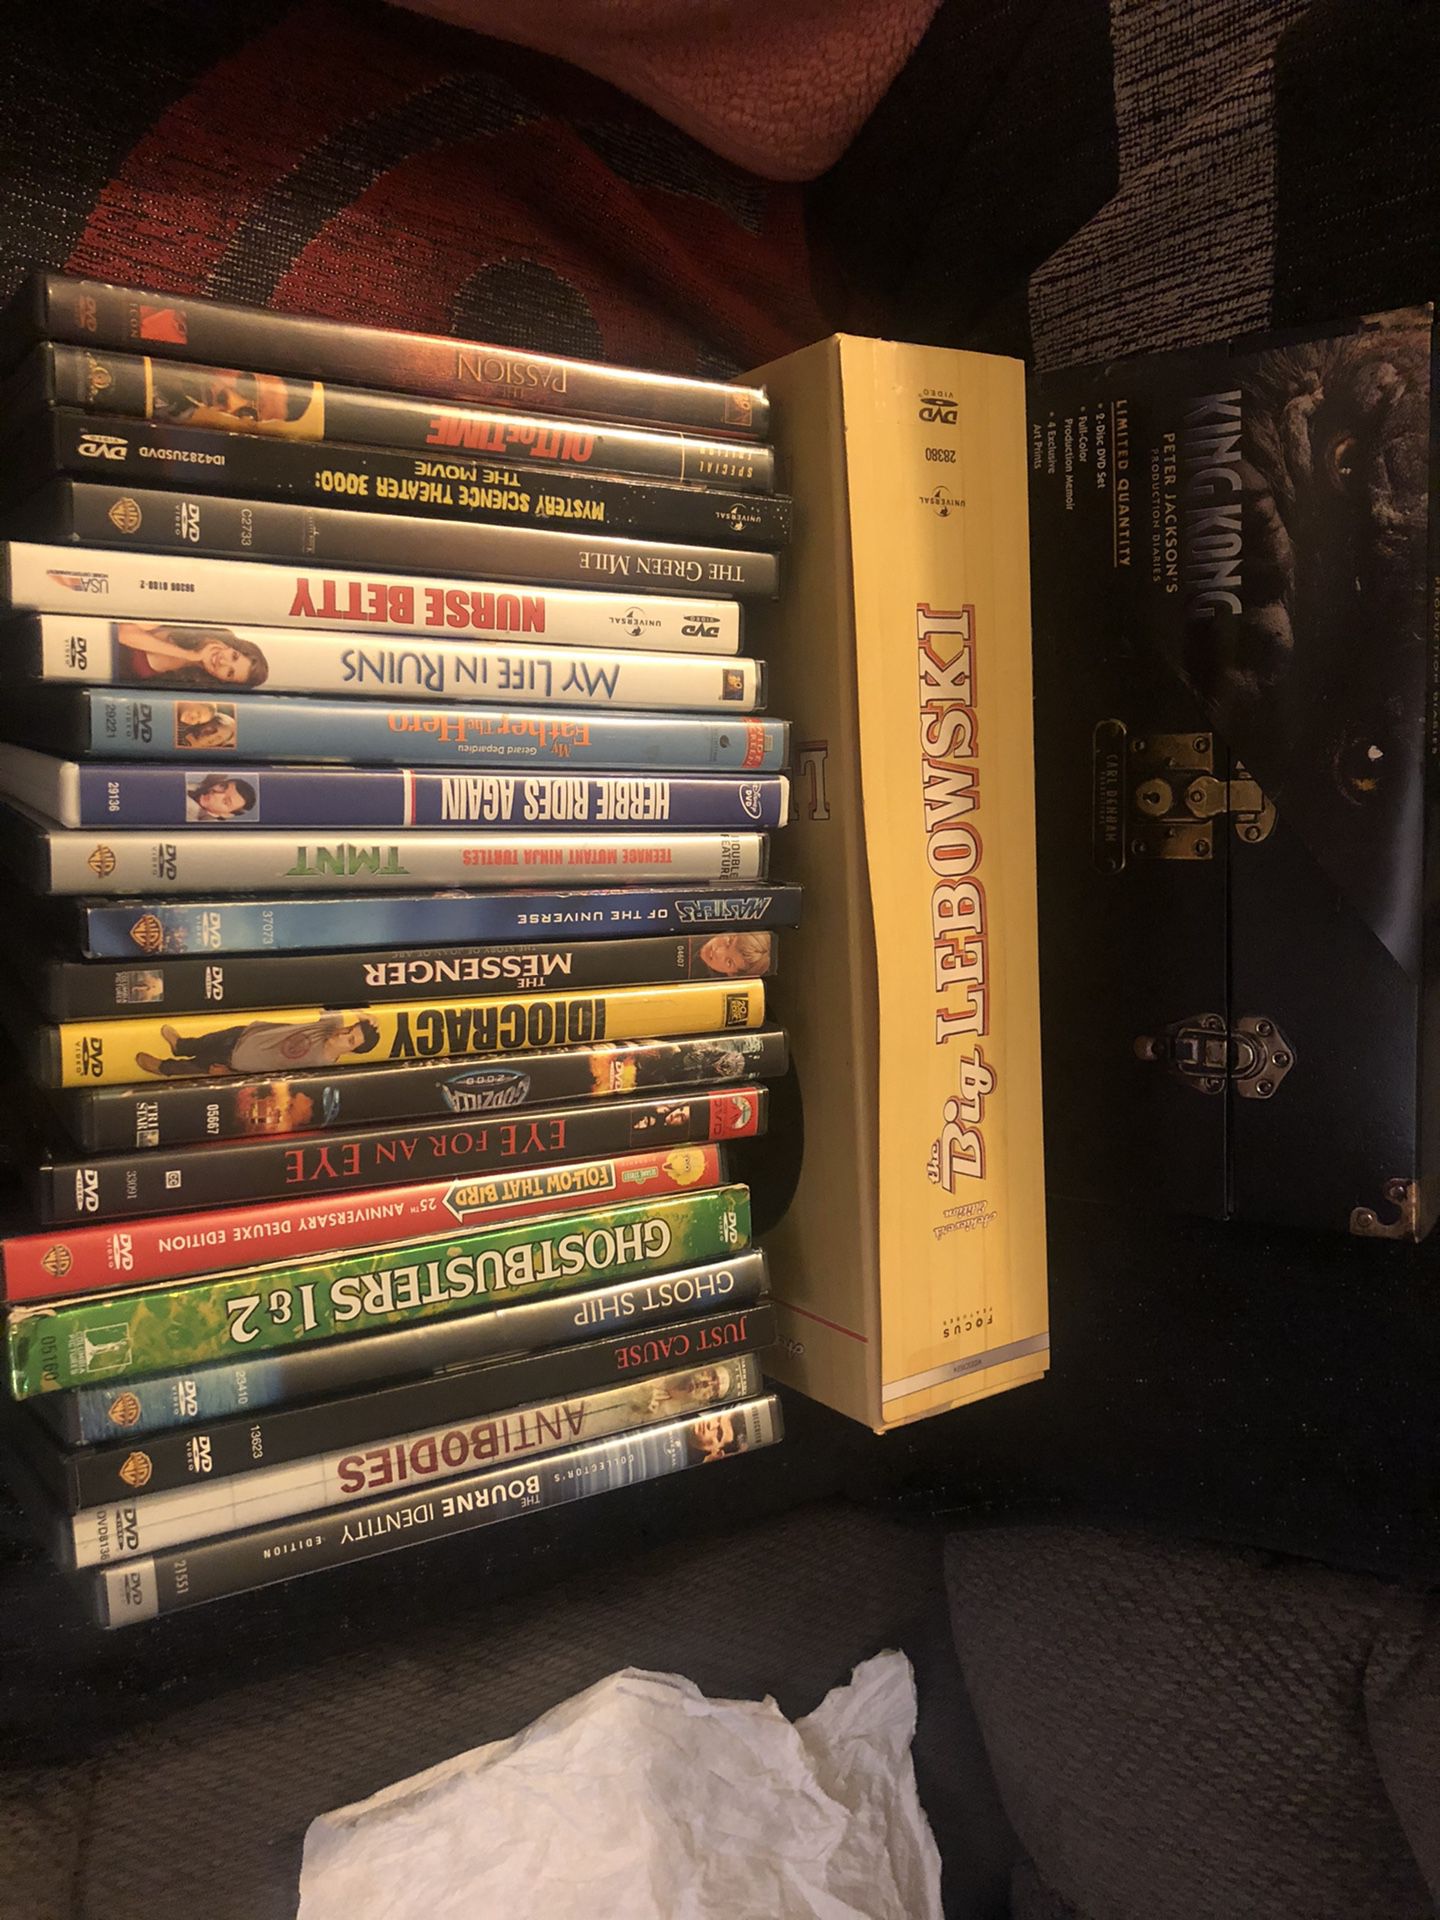 Another free bundle of DVDs